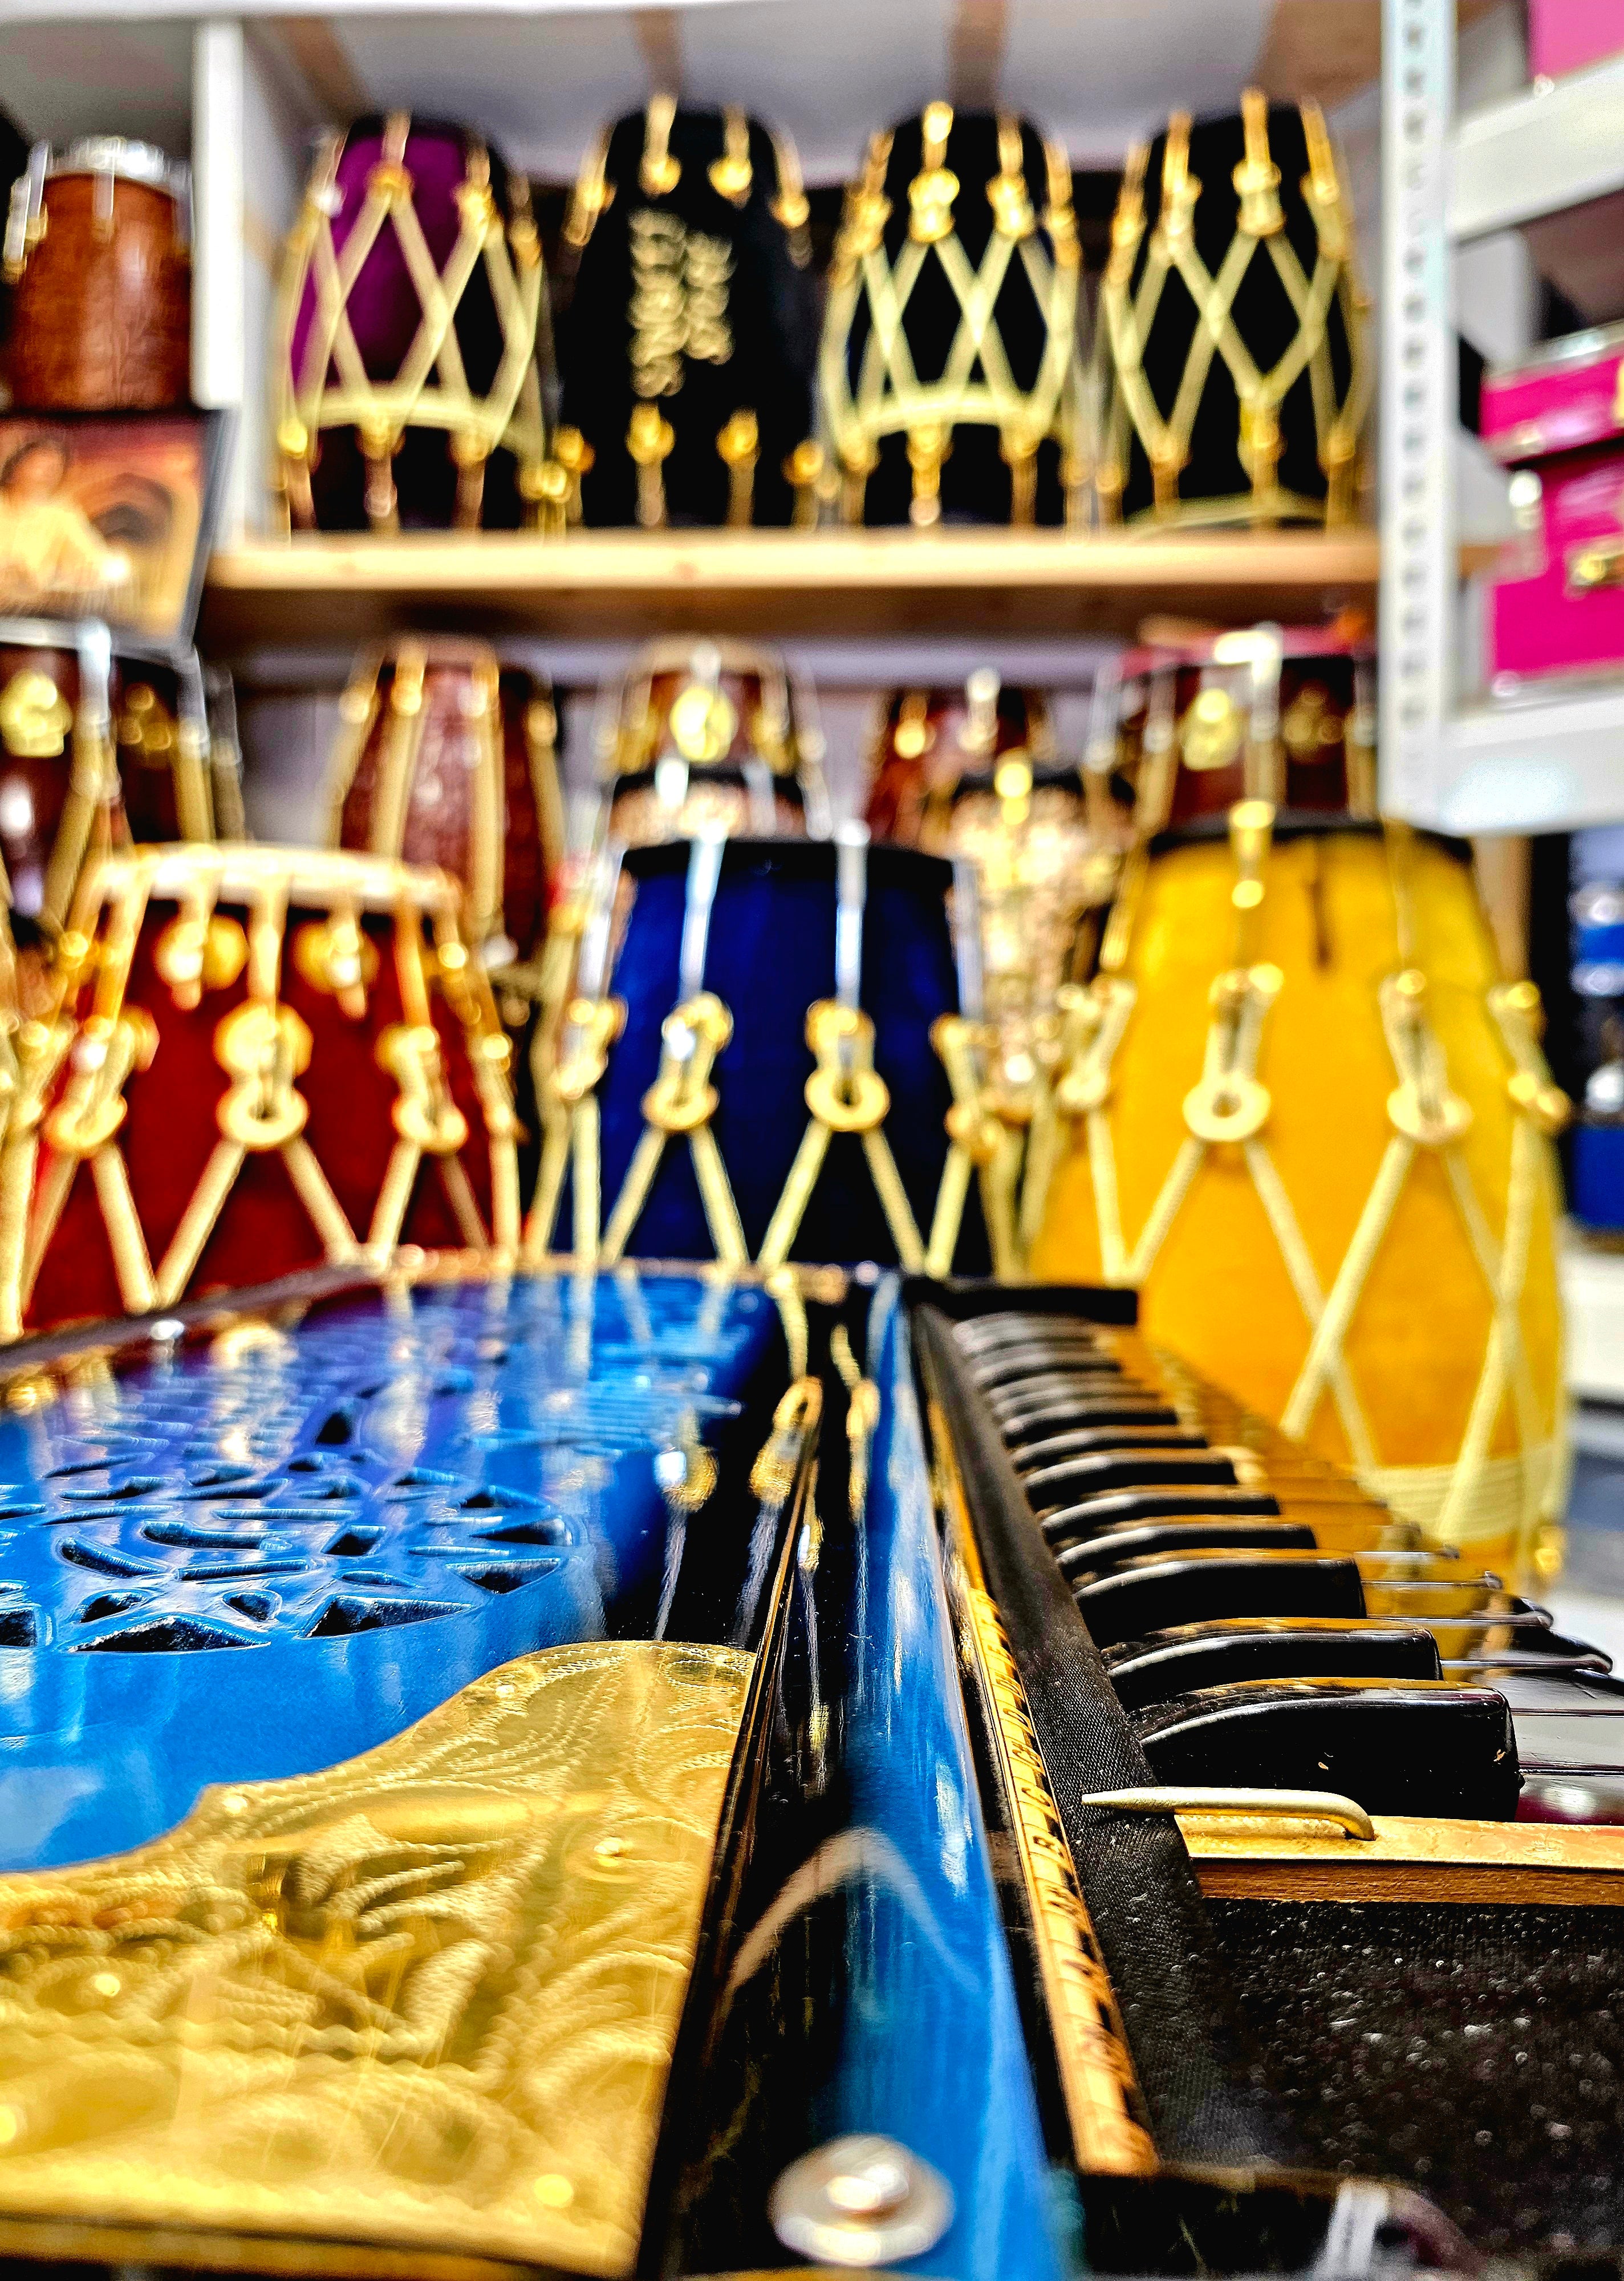 Azure Symphony: Blue and Black Blended Sangeet Store 13-Scale Changer 3 Reed BMF Harmonium with Black Keys